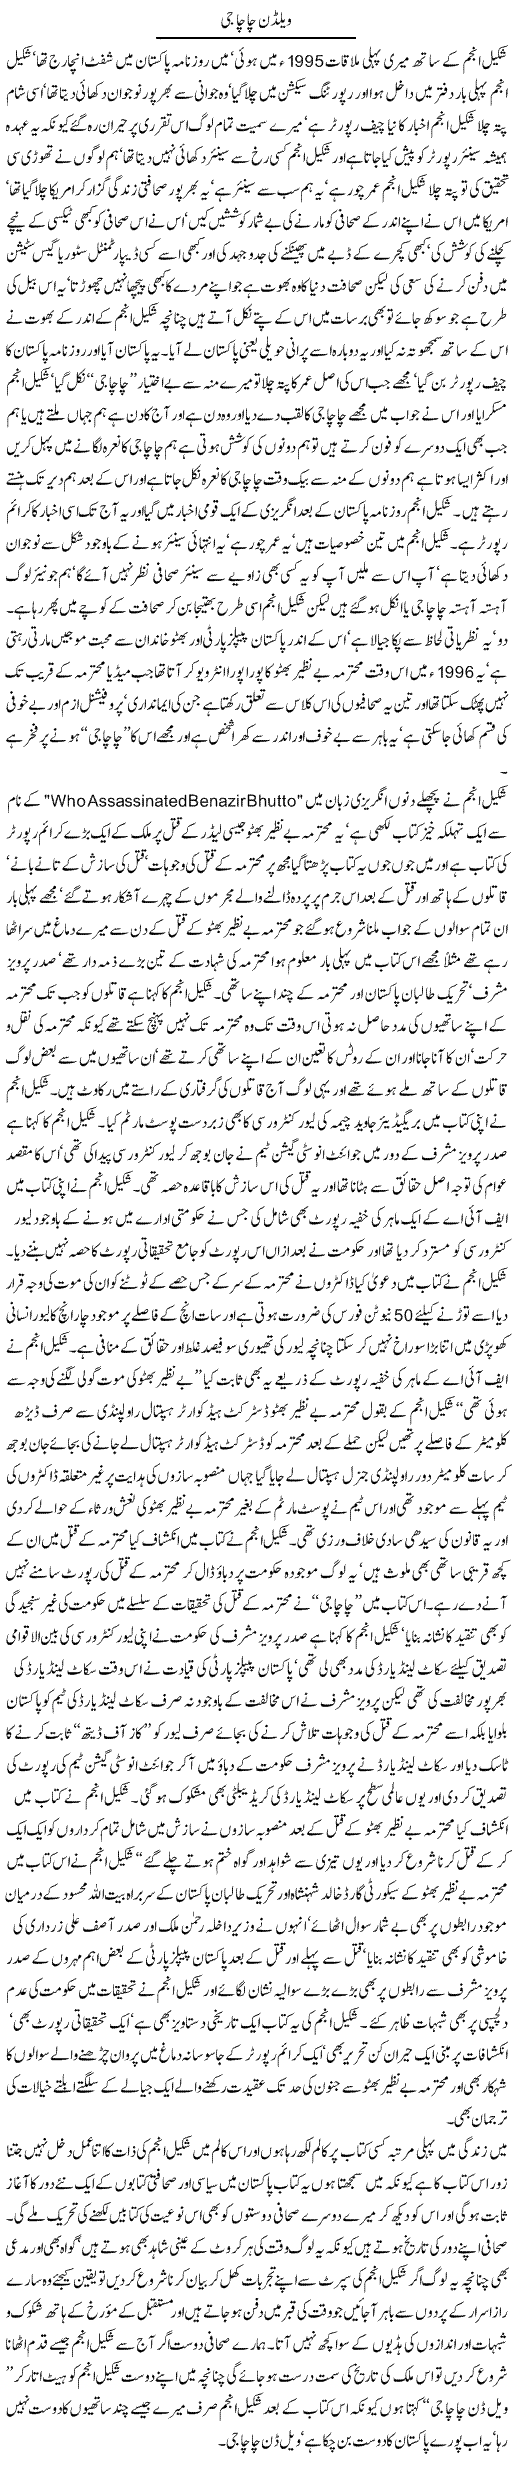 Well done Chacha Express Column Javed Chaudhary 16 April 2010